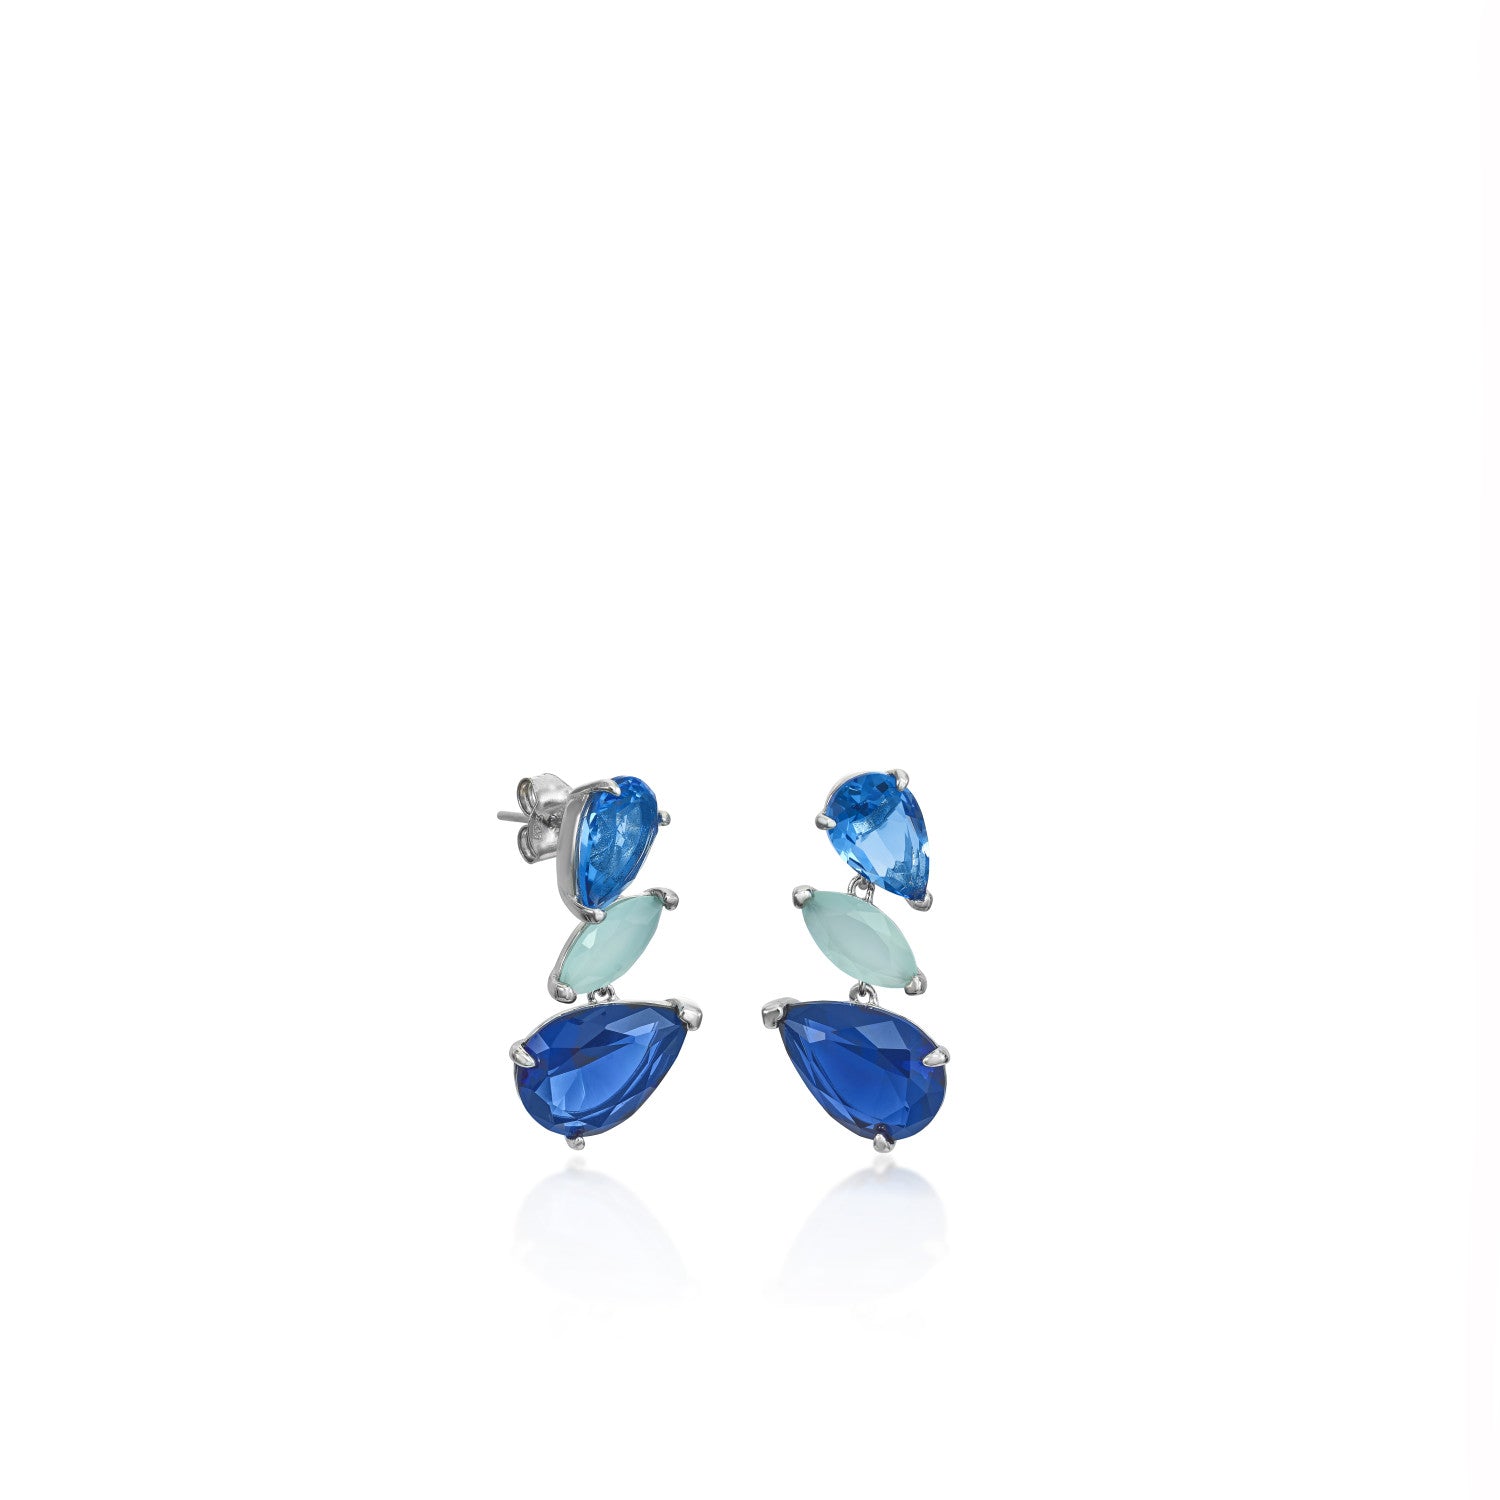 Earrings with colored stones three gems blue tone design